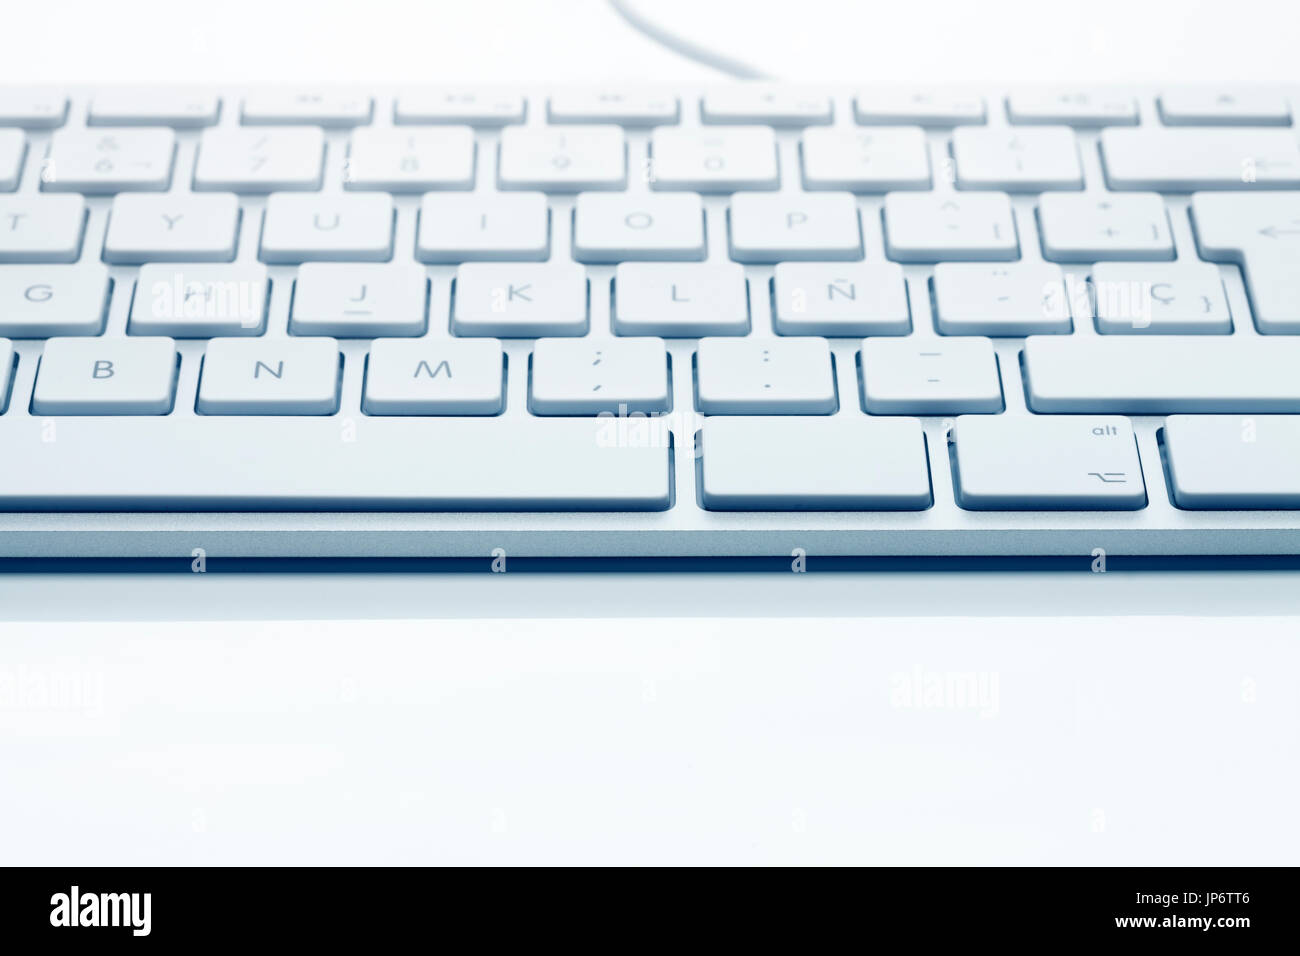 Close up front view of classical keyboard against white background. Shallow depth of field. Soft focus faded toward background. Stock Photo